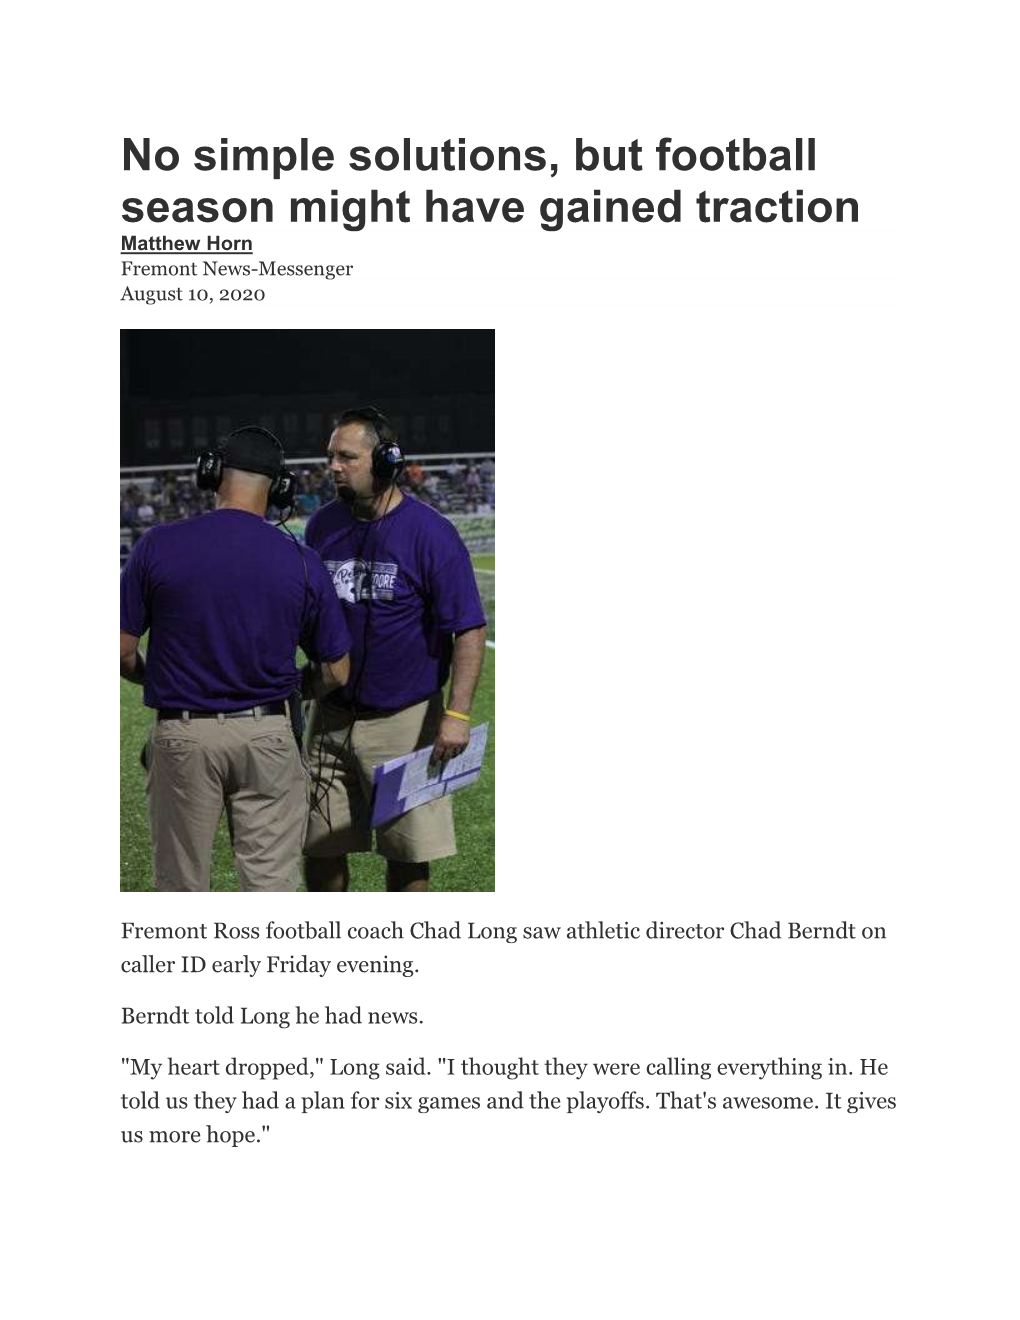 No Simple Solutions, but Football Season Might Have Gained Traction Matthew Horn Fremont News-Messenger August 10, 2020